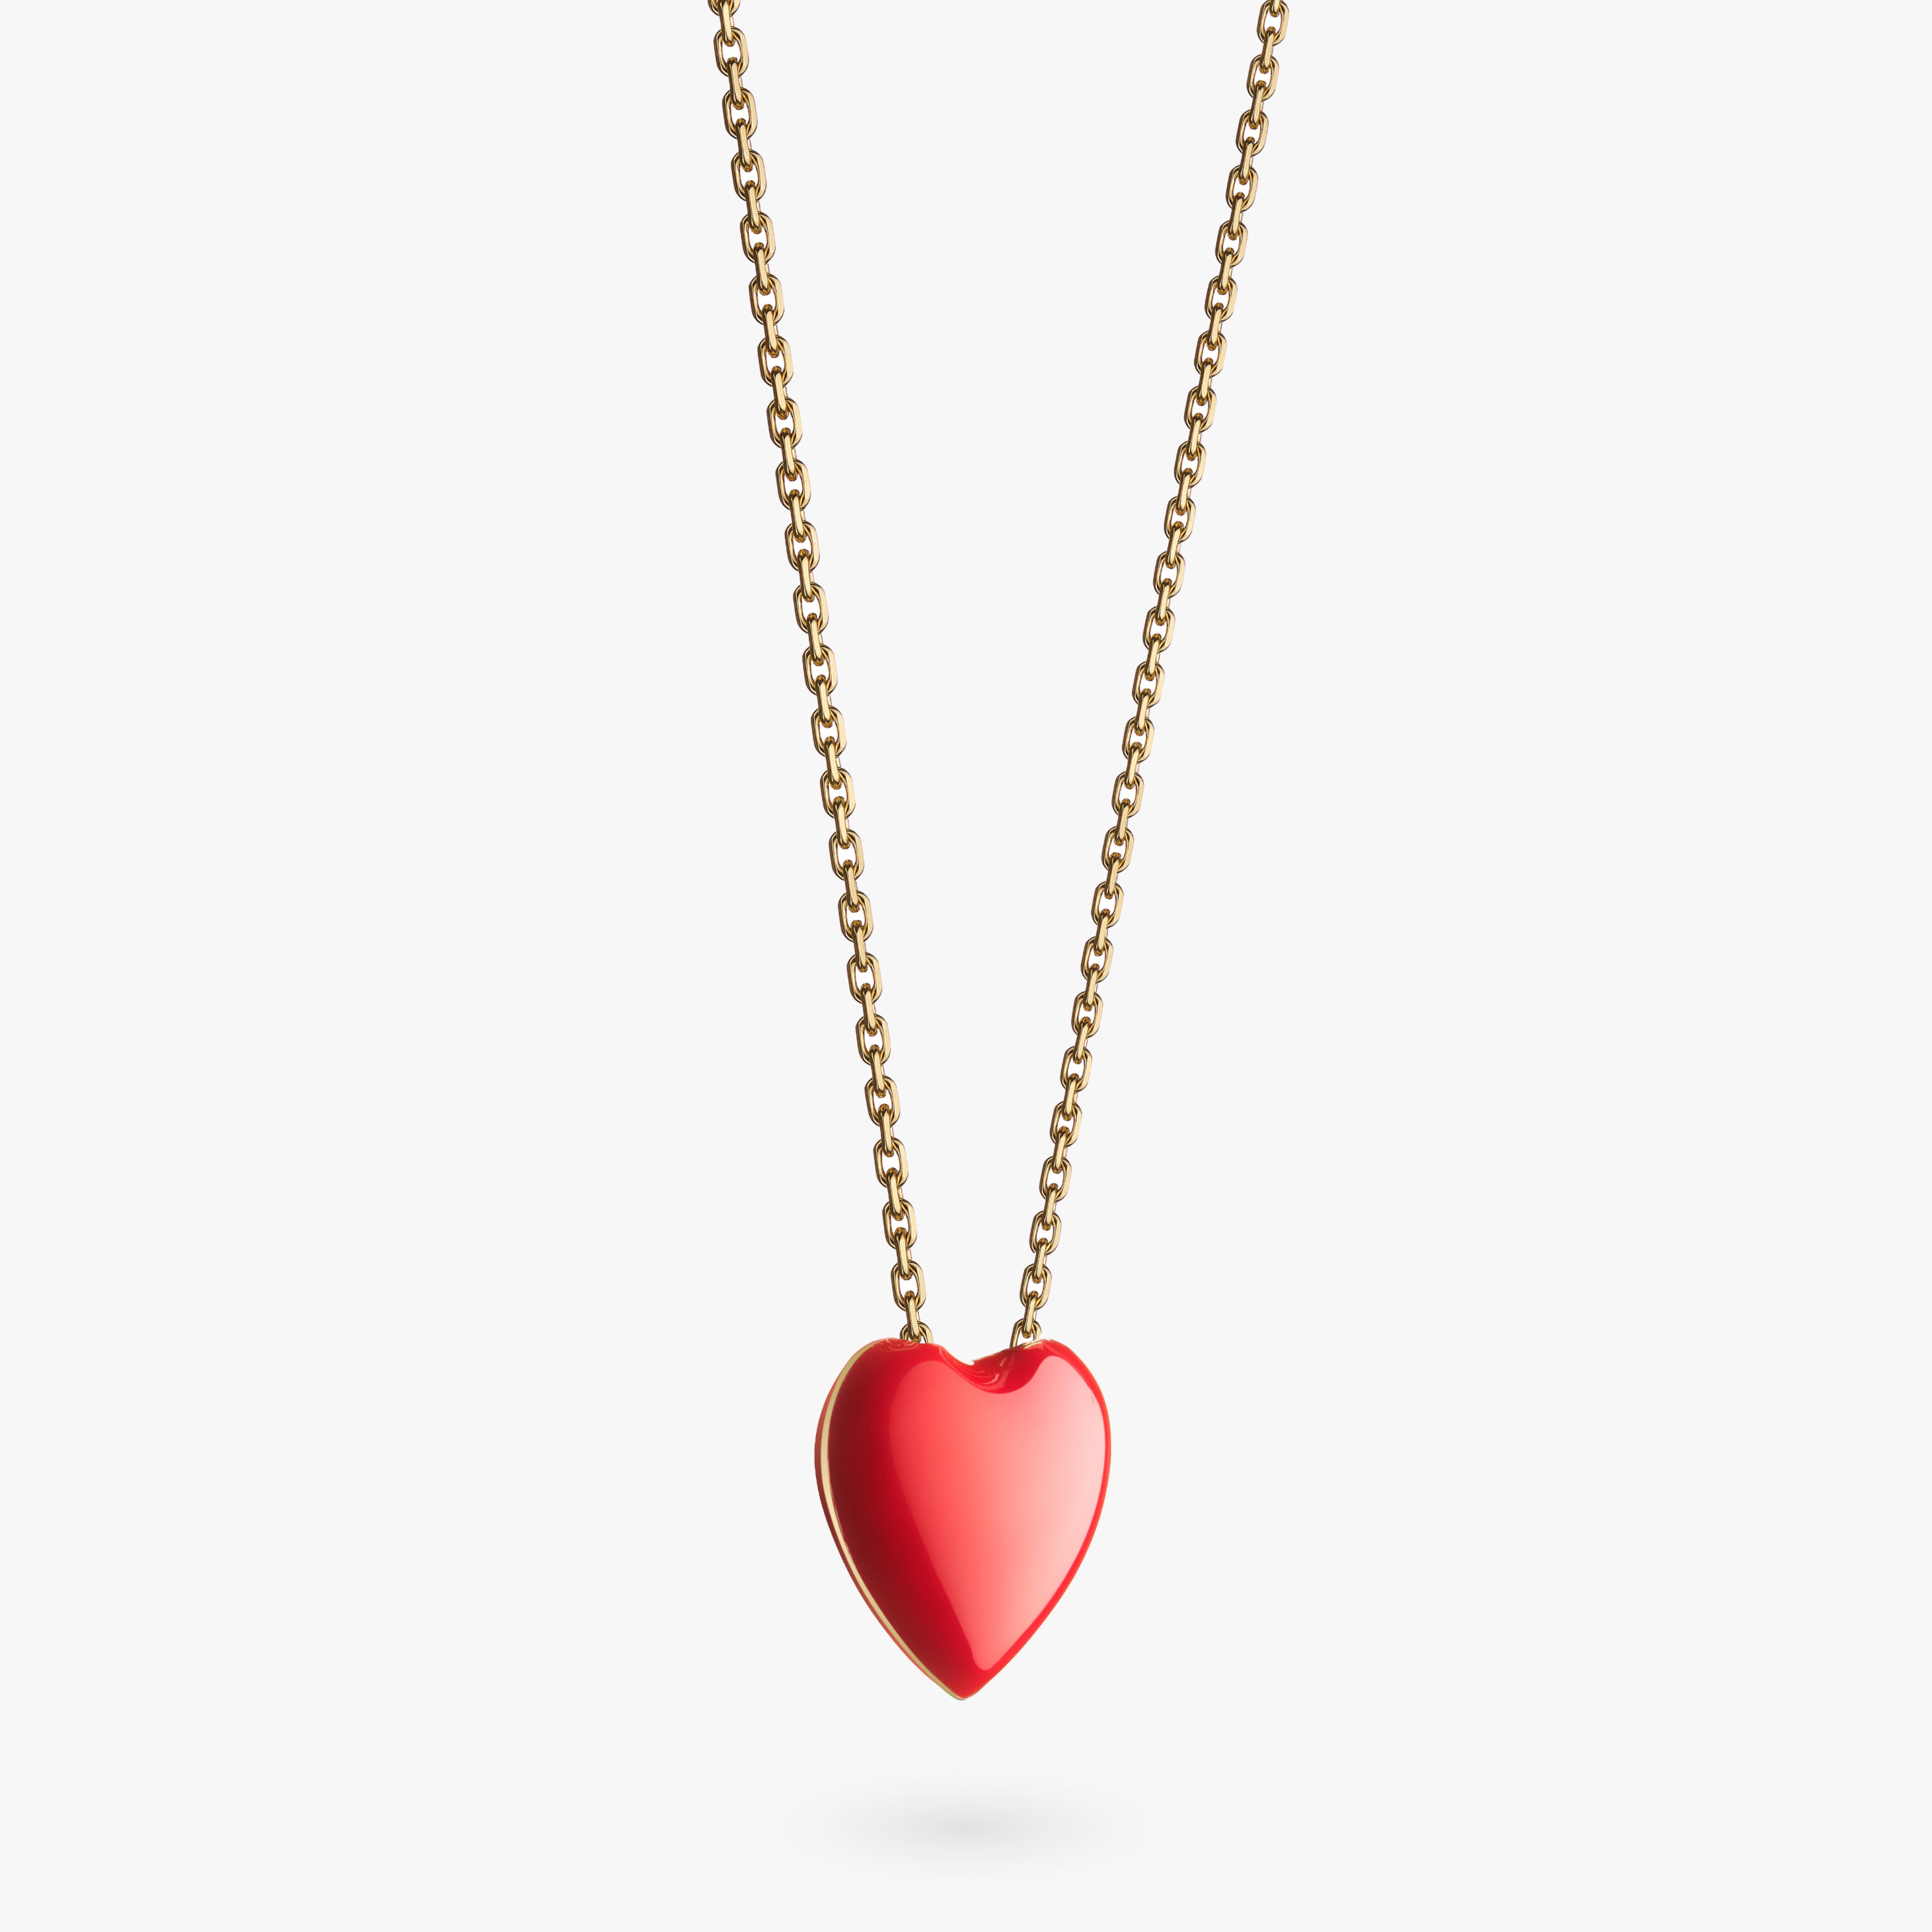 Big red heart necklace